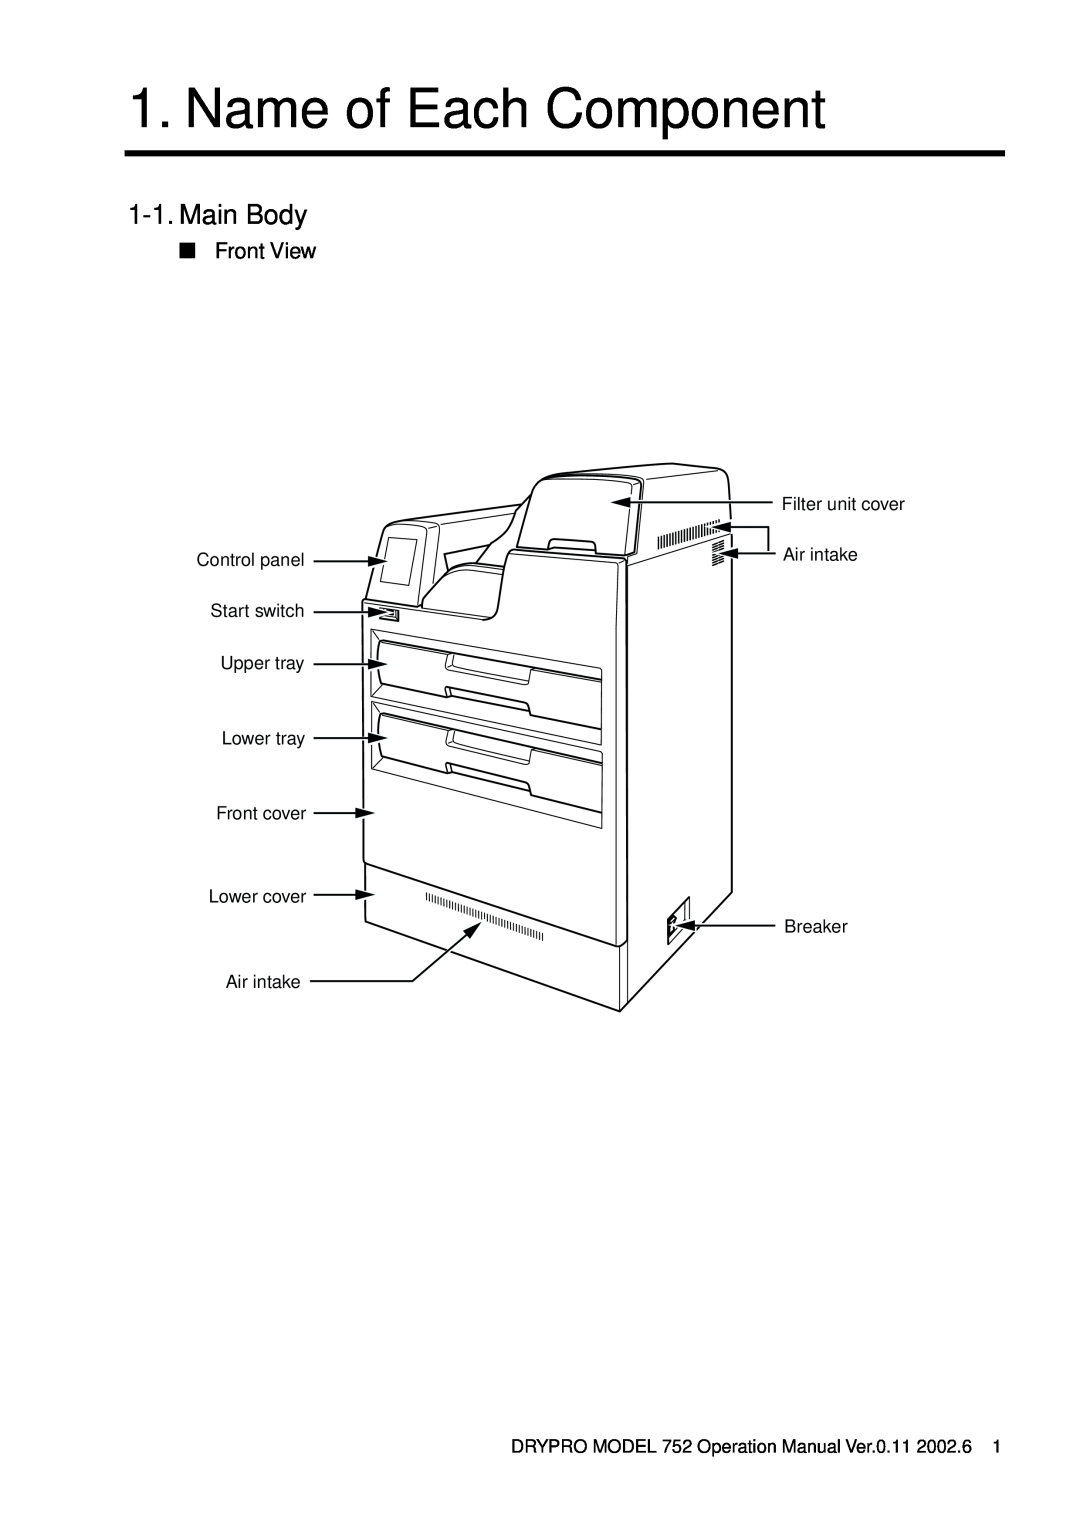 Konica Minolta 752 operation manual Name of Each Component, Main Body, Front View, Lower cover Air intake 